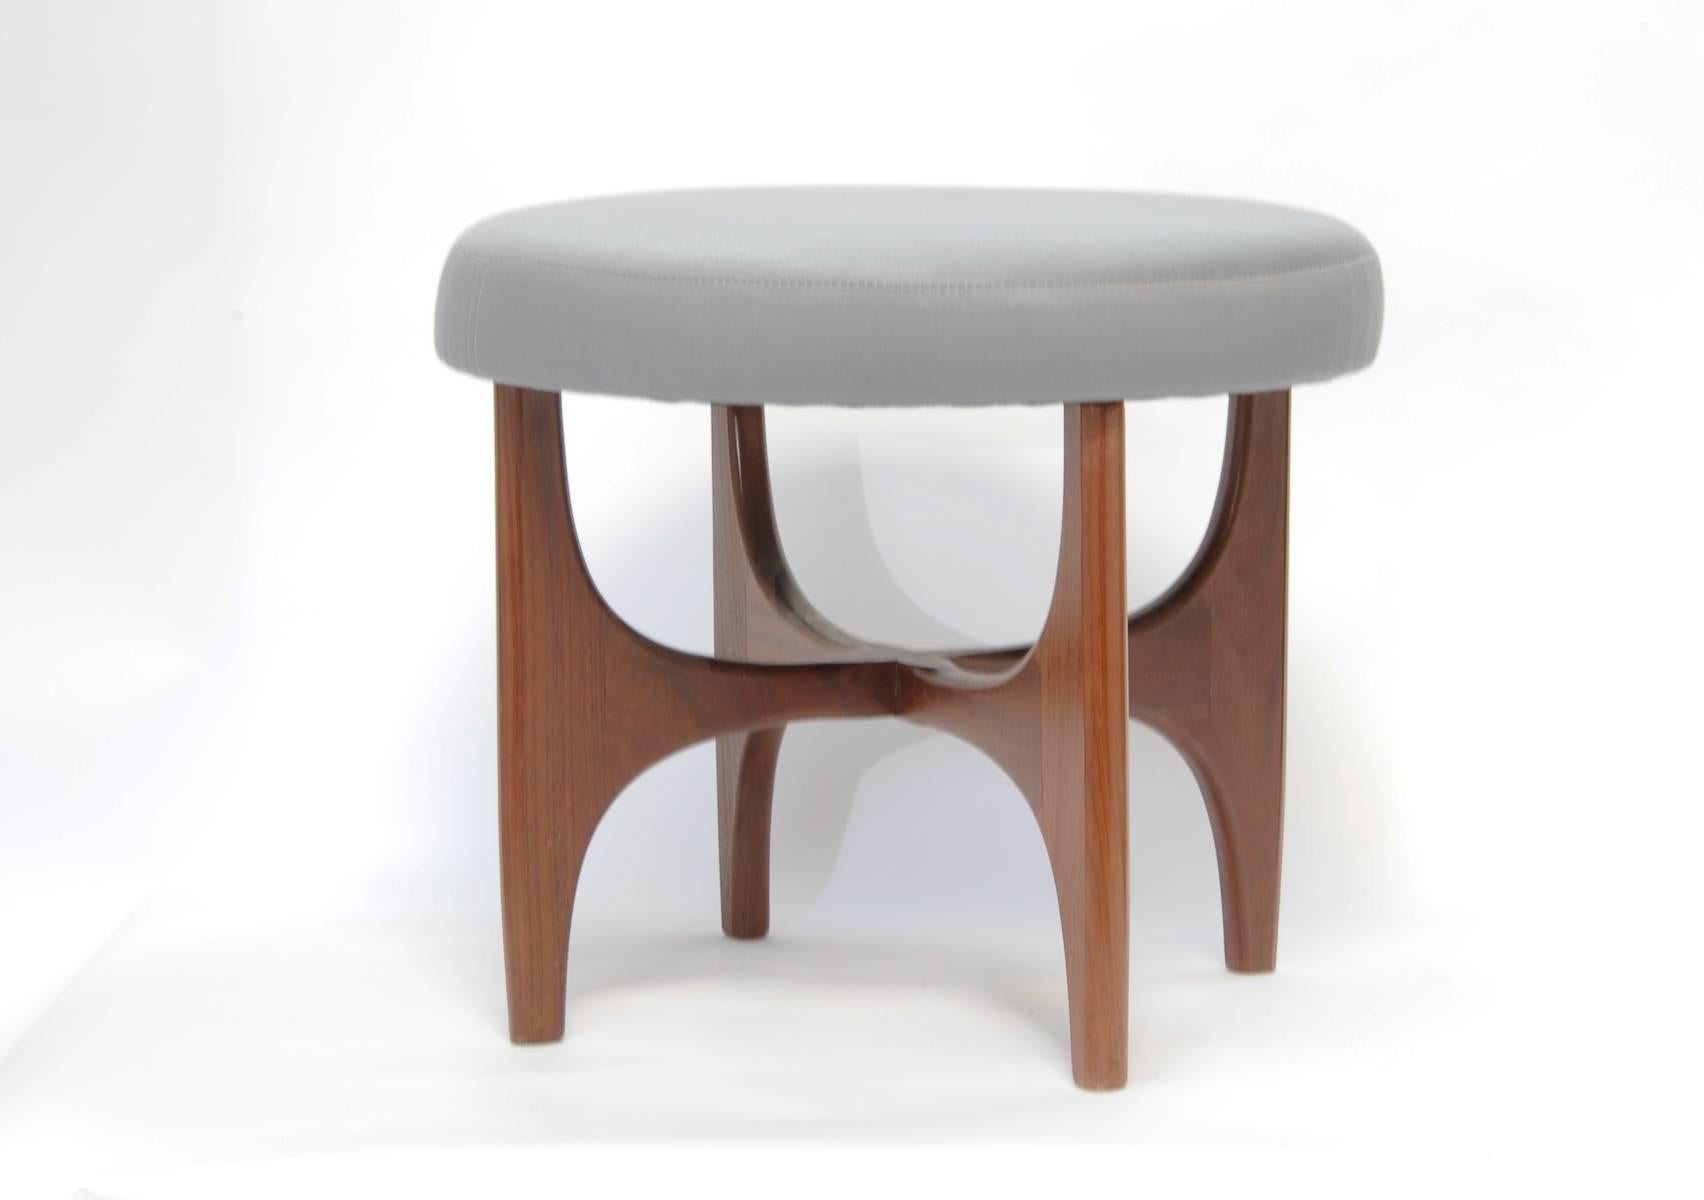 A pair of walnut stools with upholstered tops. These beauties are handsome and decorative in any room or environment.